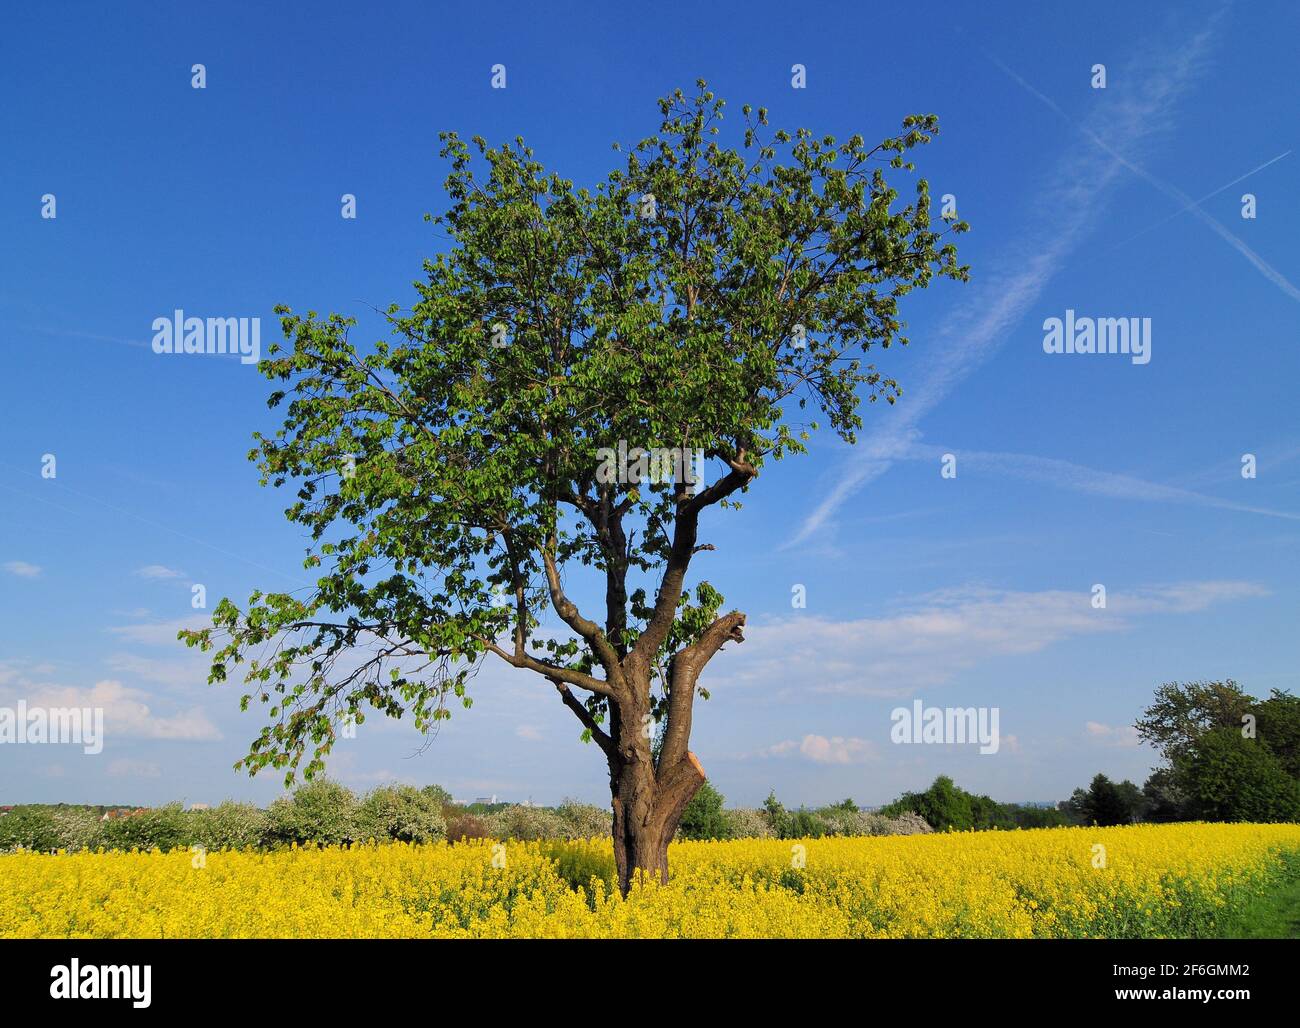 Lonely Broadleaf Tree In A Yellow Blooming Canola Field In Hesse Germany During A Sunny Day Stock Photo